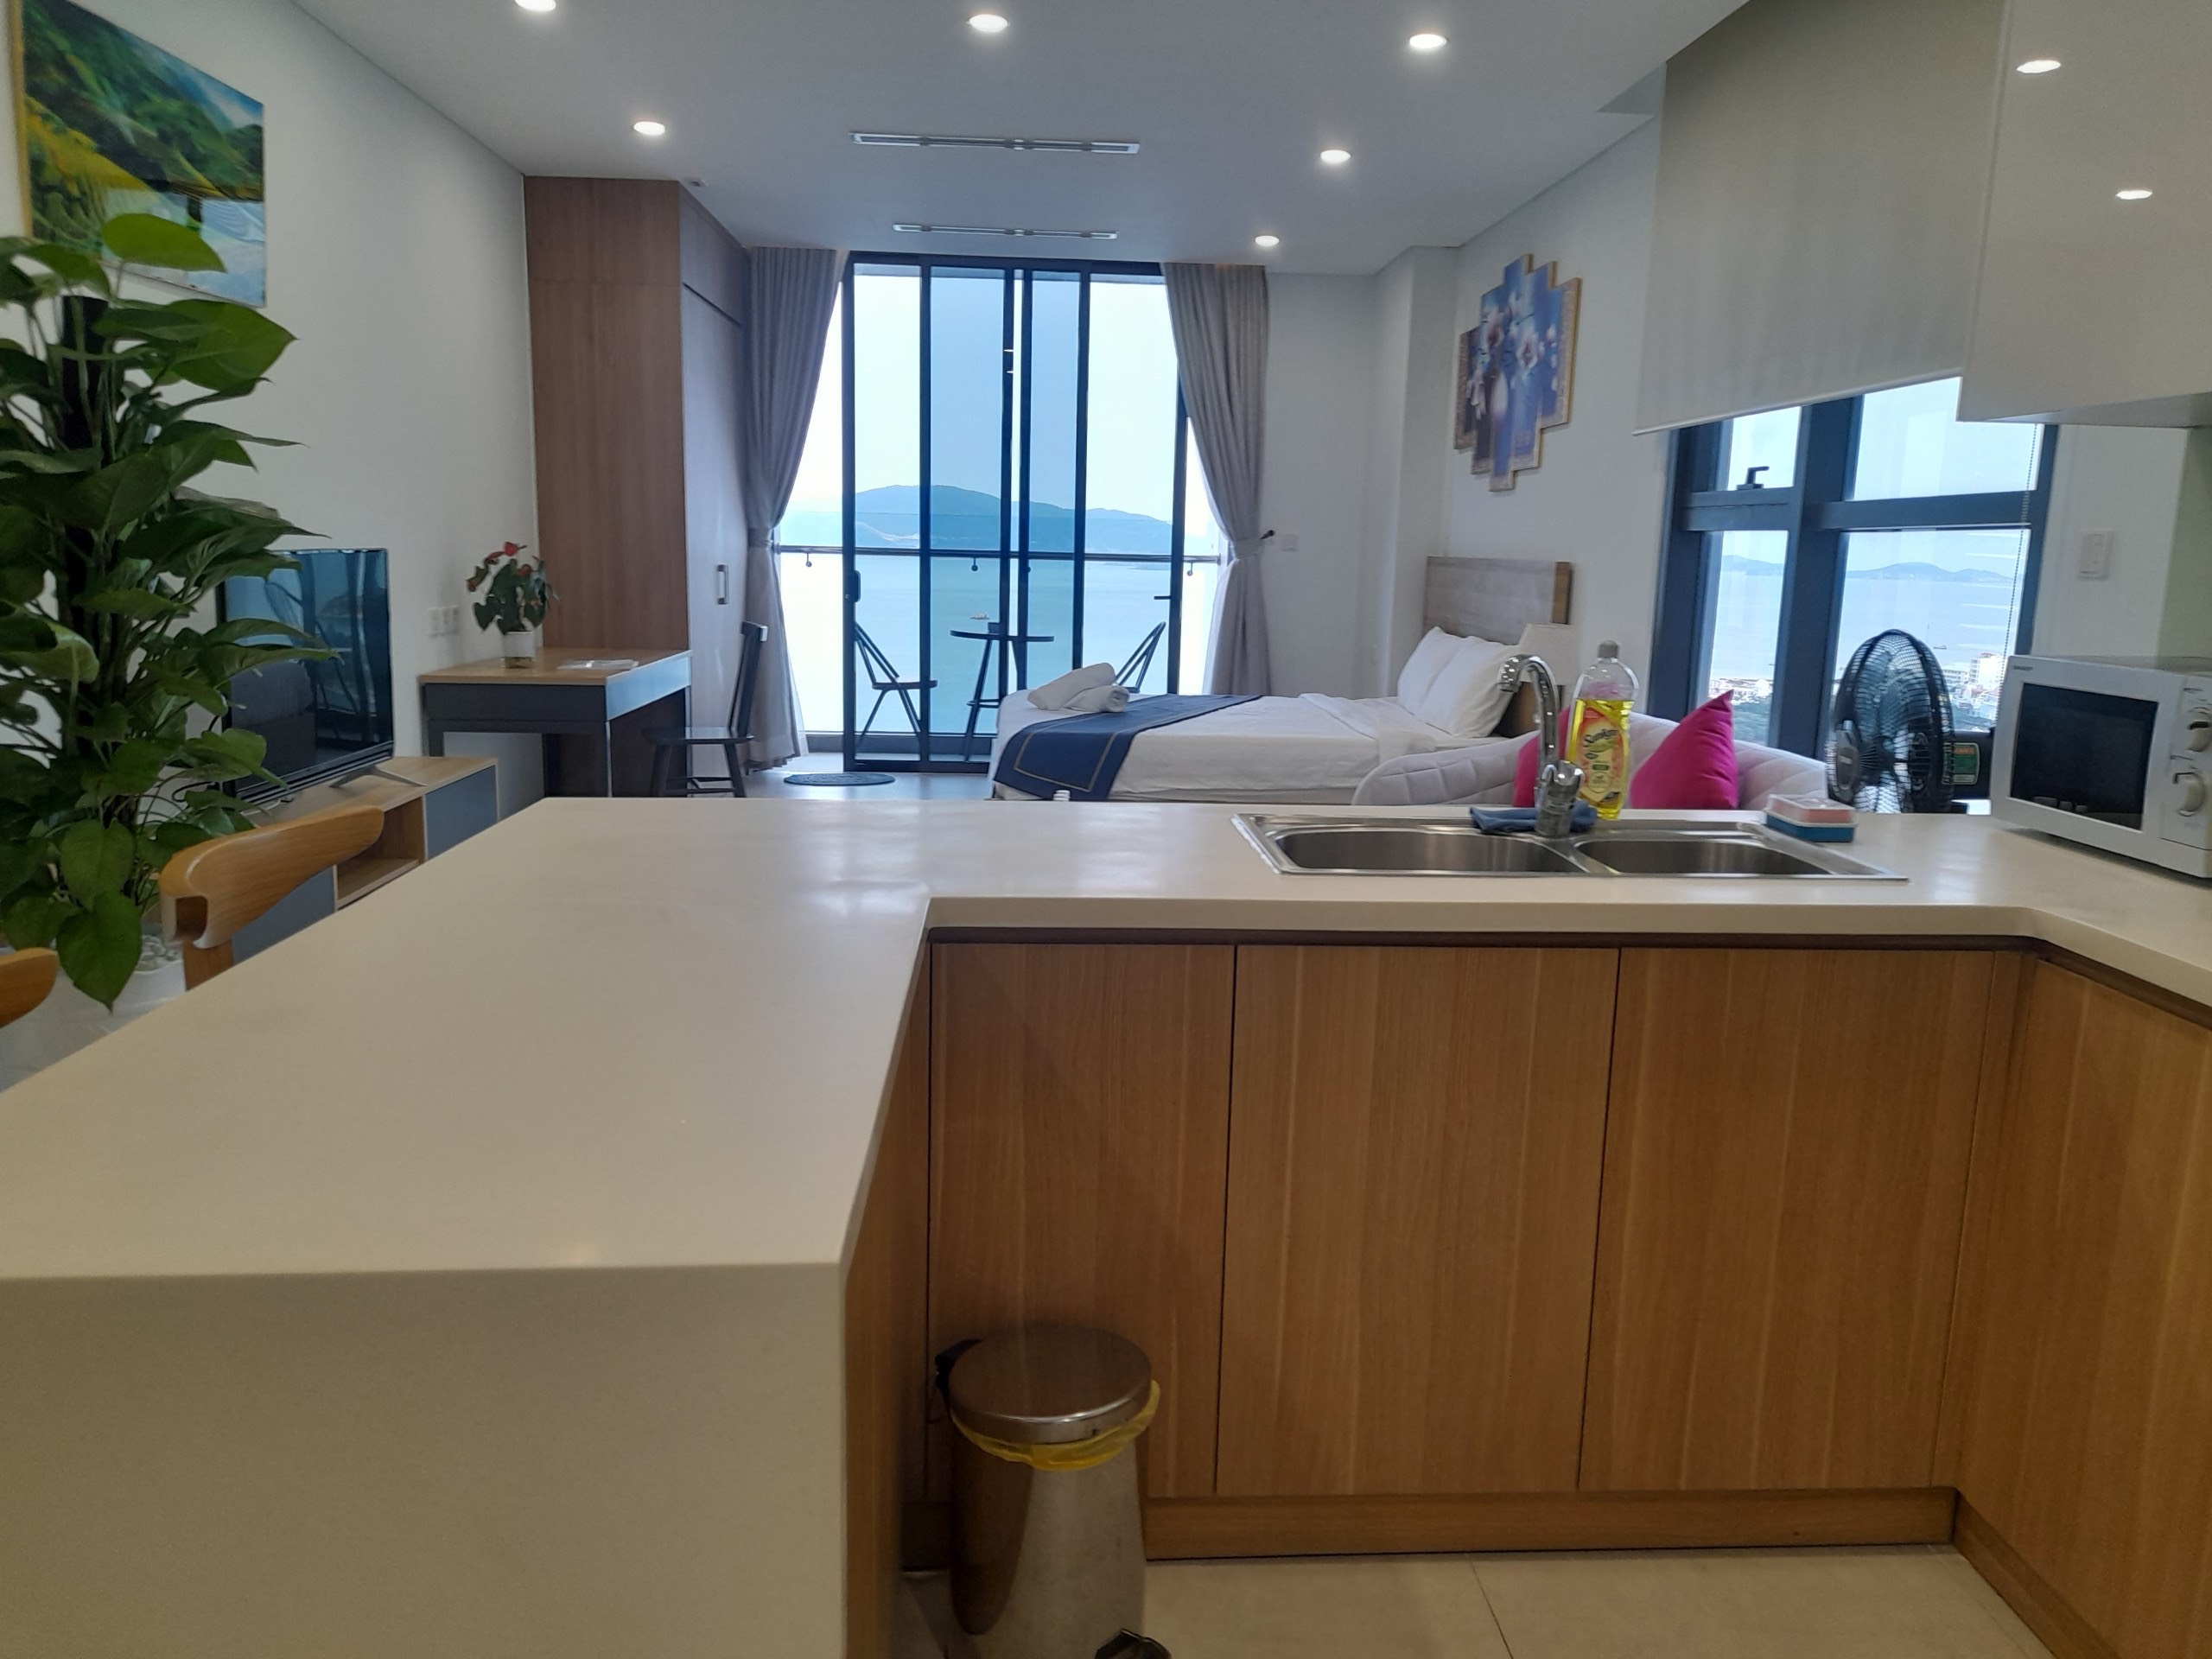 Scenia Bay Nha Trang for rent | One bedroom plus | Sea view | 11 million